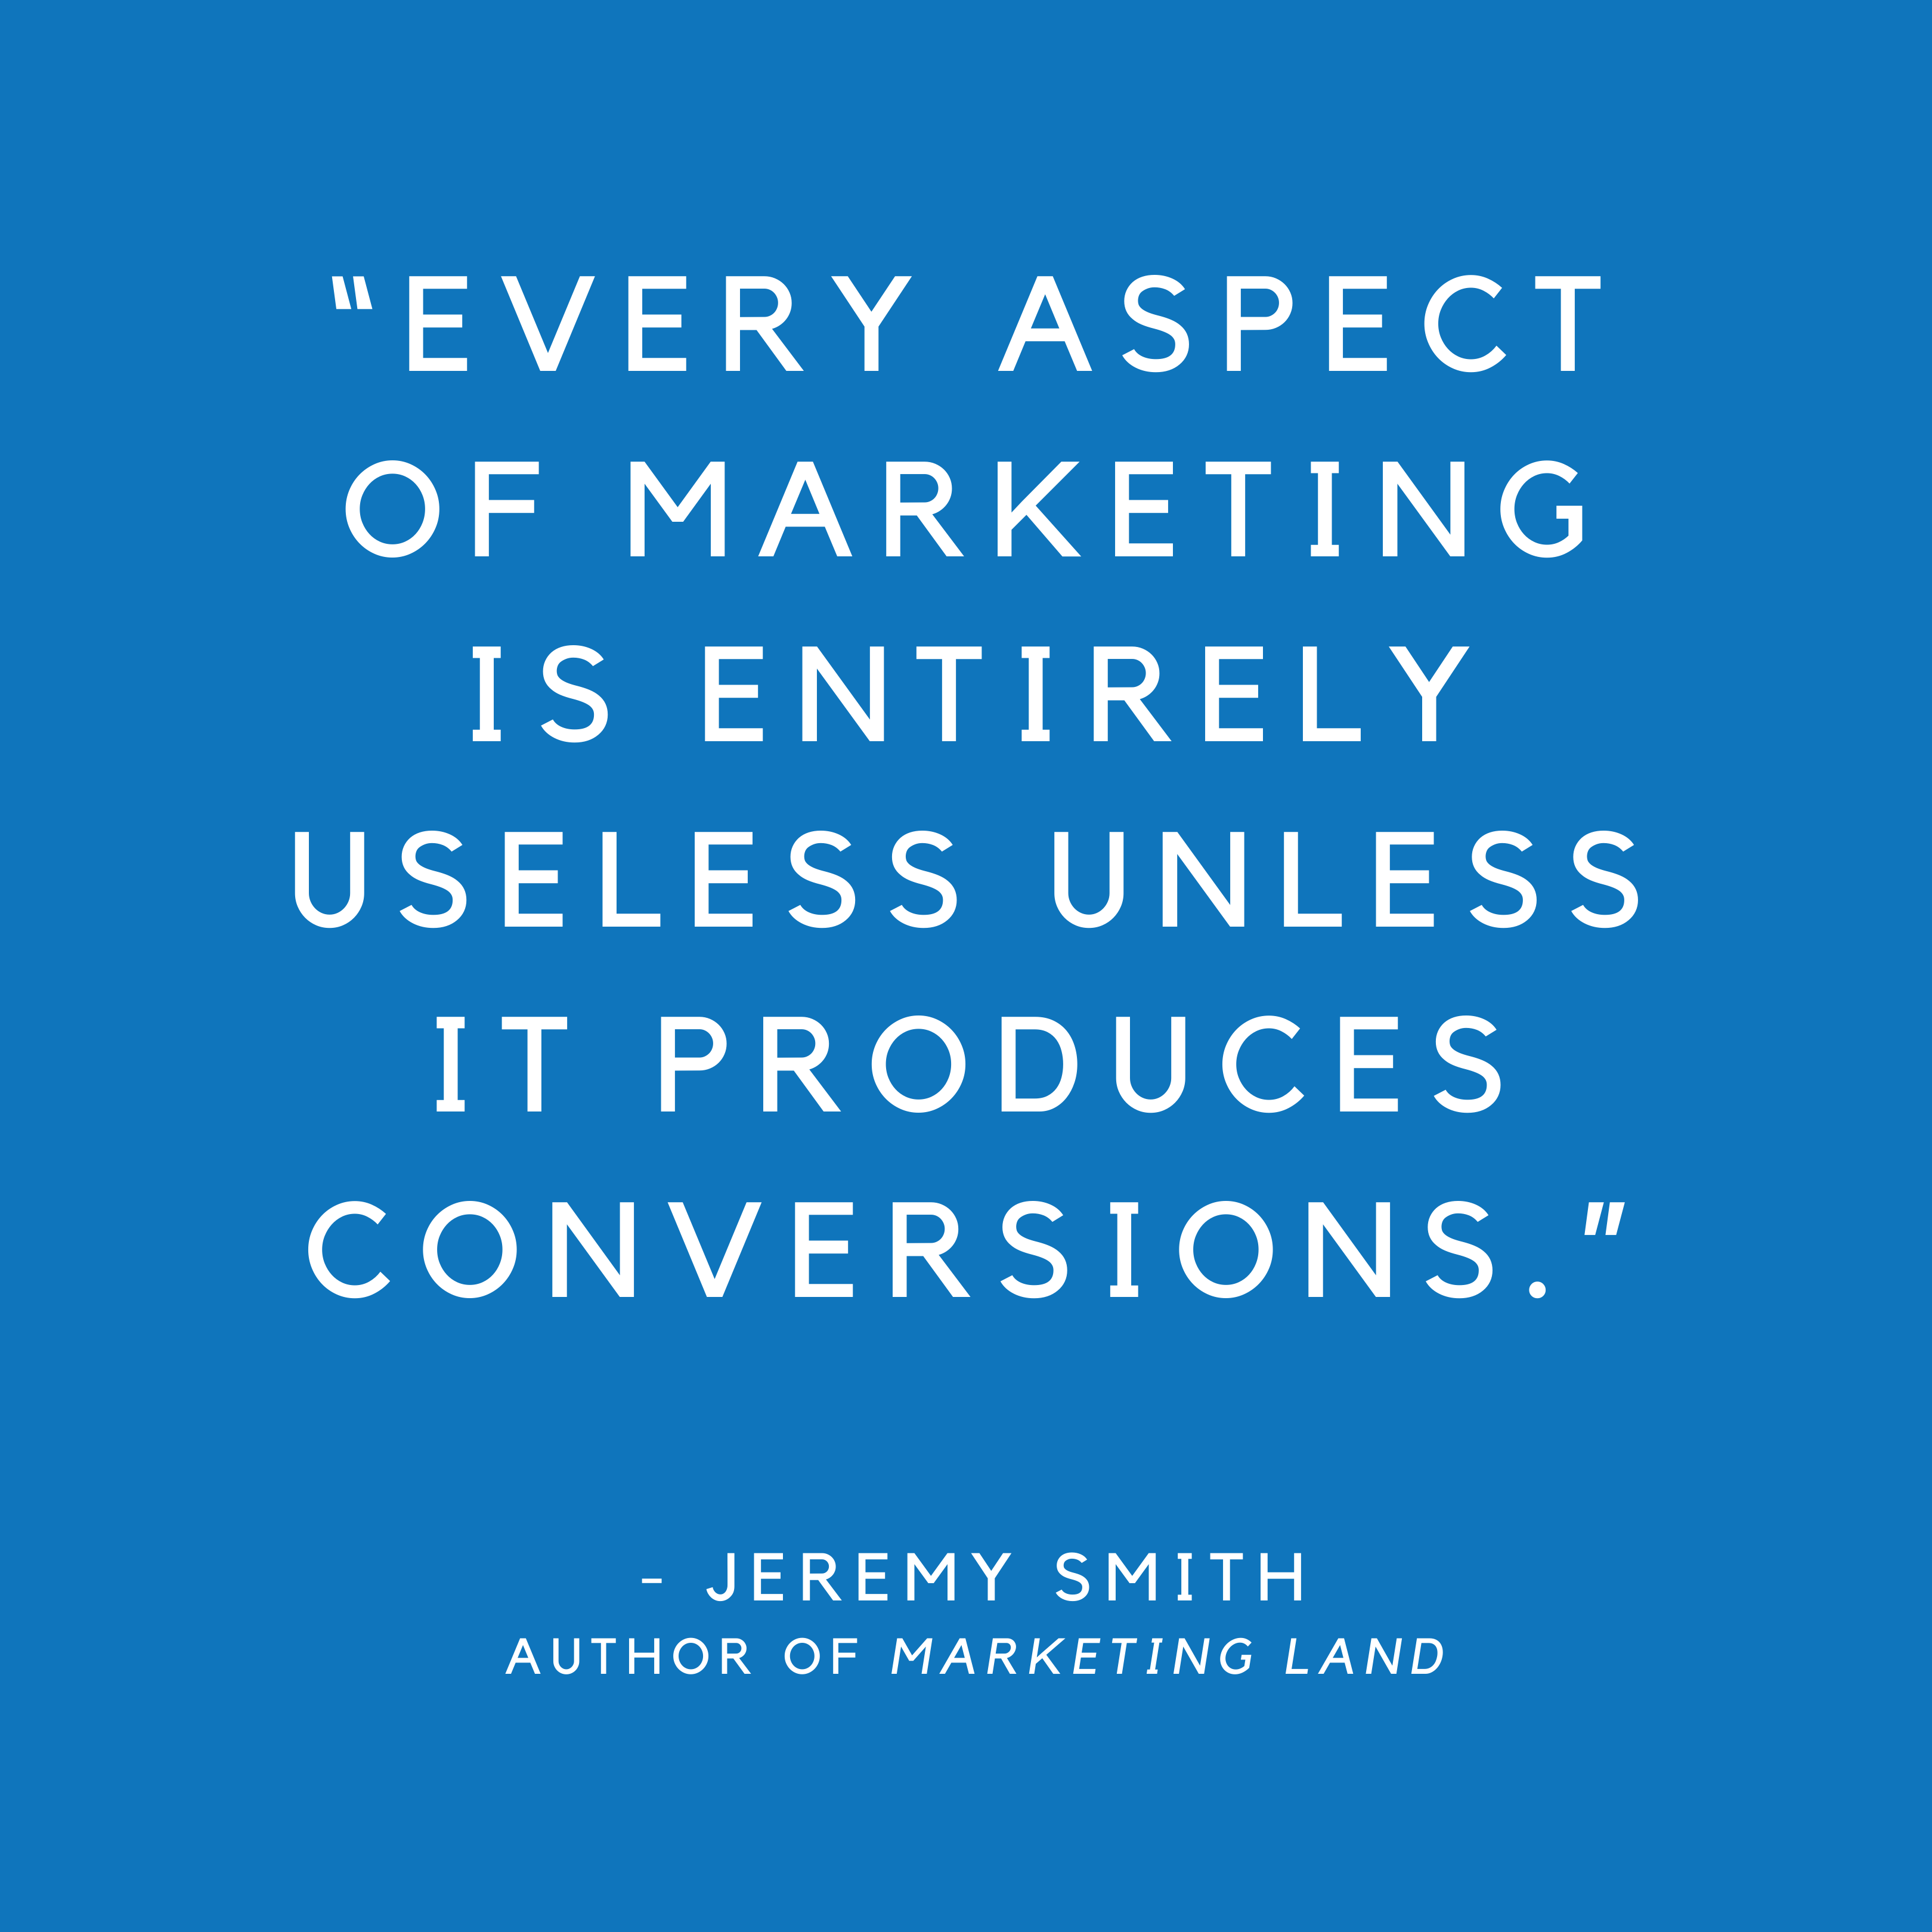 Infographic with the text "Every aspect of marketing is entirely useless unless it produces conversions"